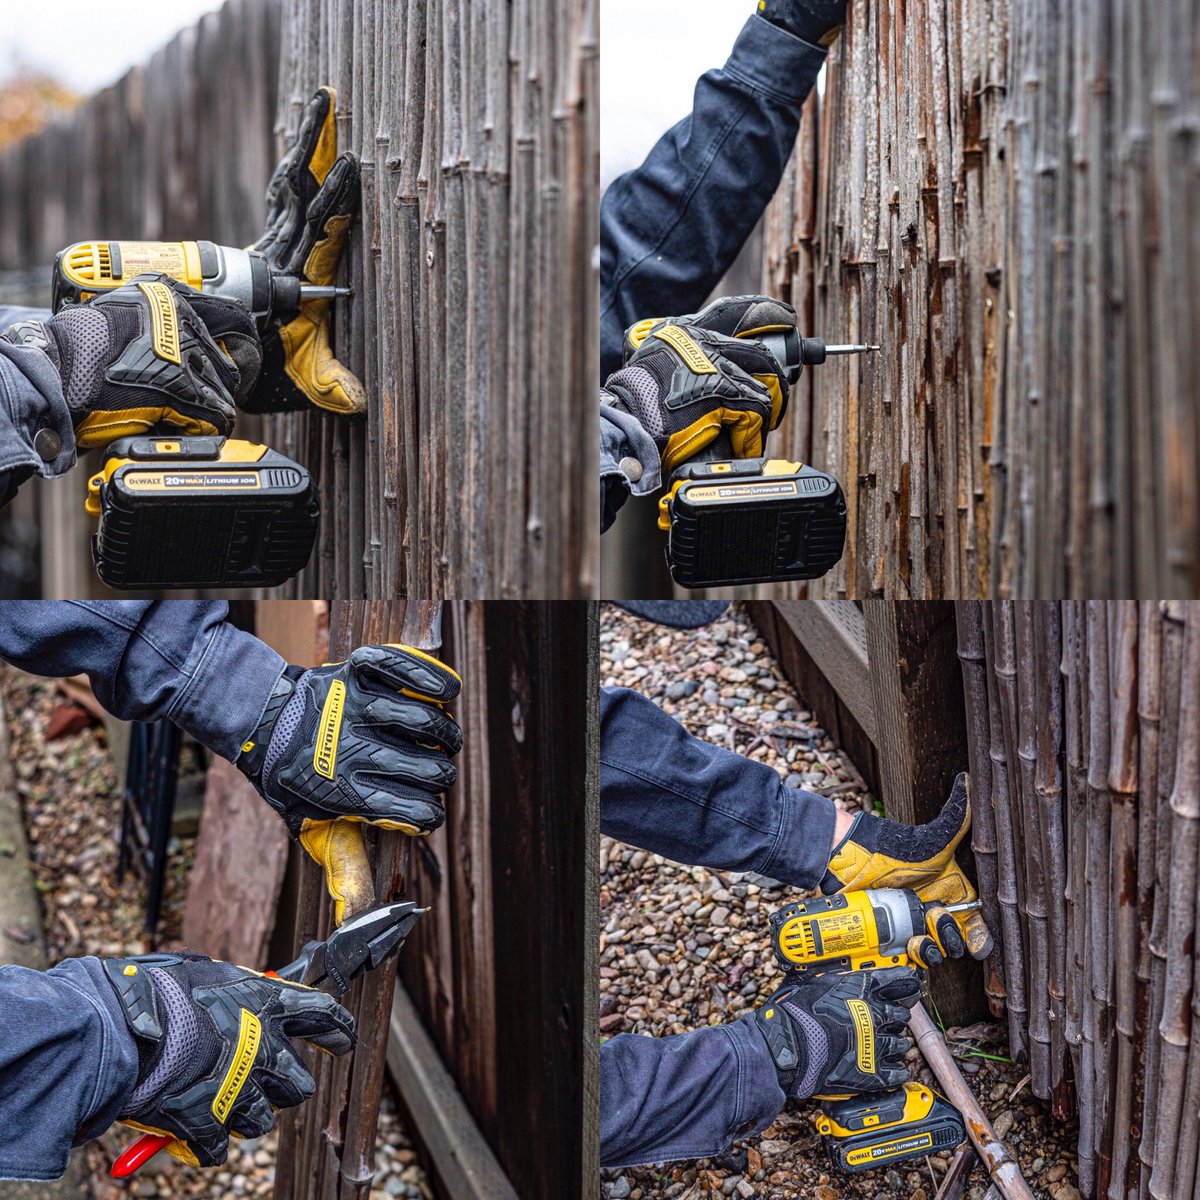 We used IEX-MIGL while doing some fence repair. High dexterity of the leather palm works great for using various hand tools, holding fasteners and gripping damp wood. #ironclad #ironcladgloves #iamironclad #handsafety #diy #diyprojects #yardwork #gloves